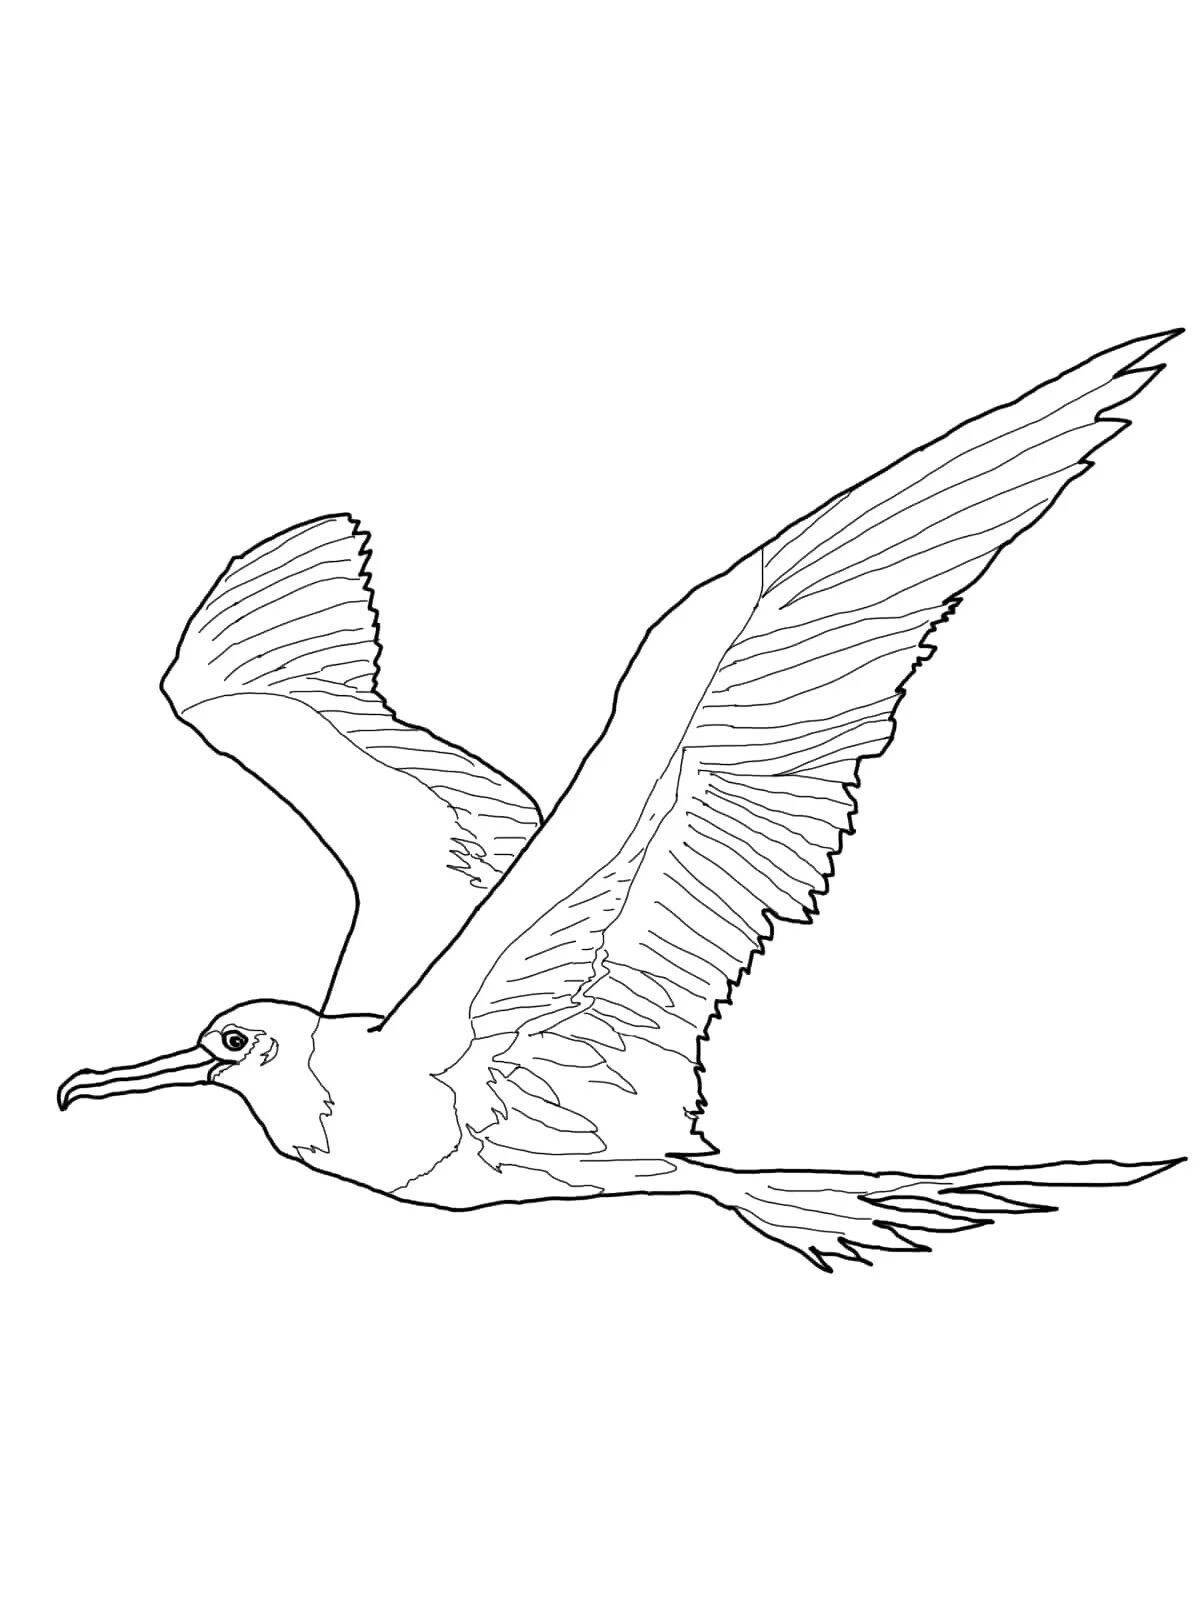 Majestic albatross coloring page